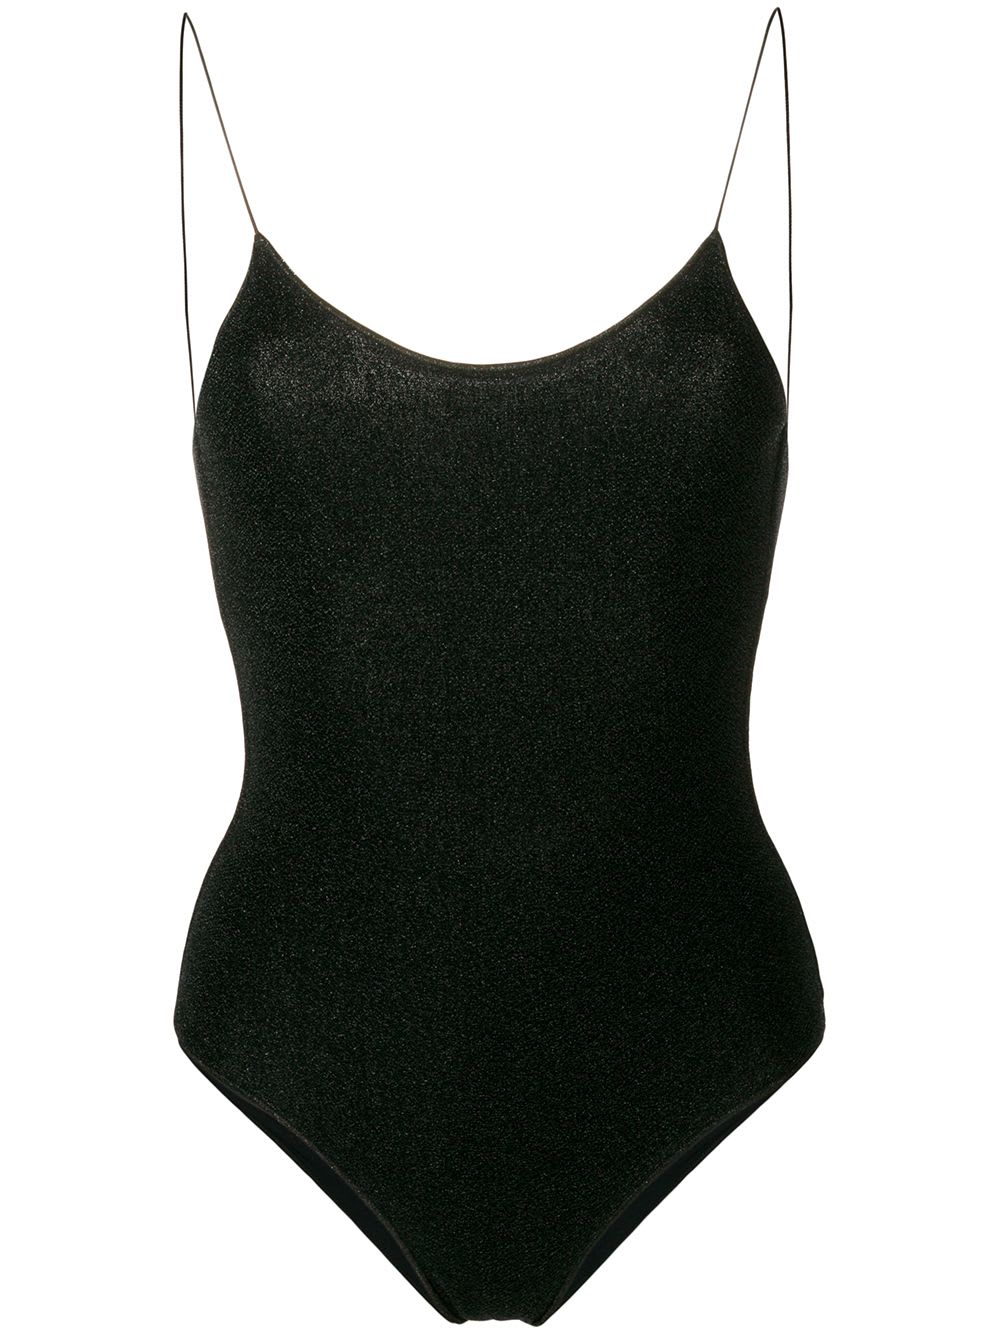 Oseree Black Hs21 Lumiere Maillot One-piece Swimsuit